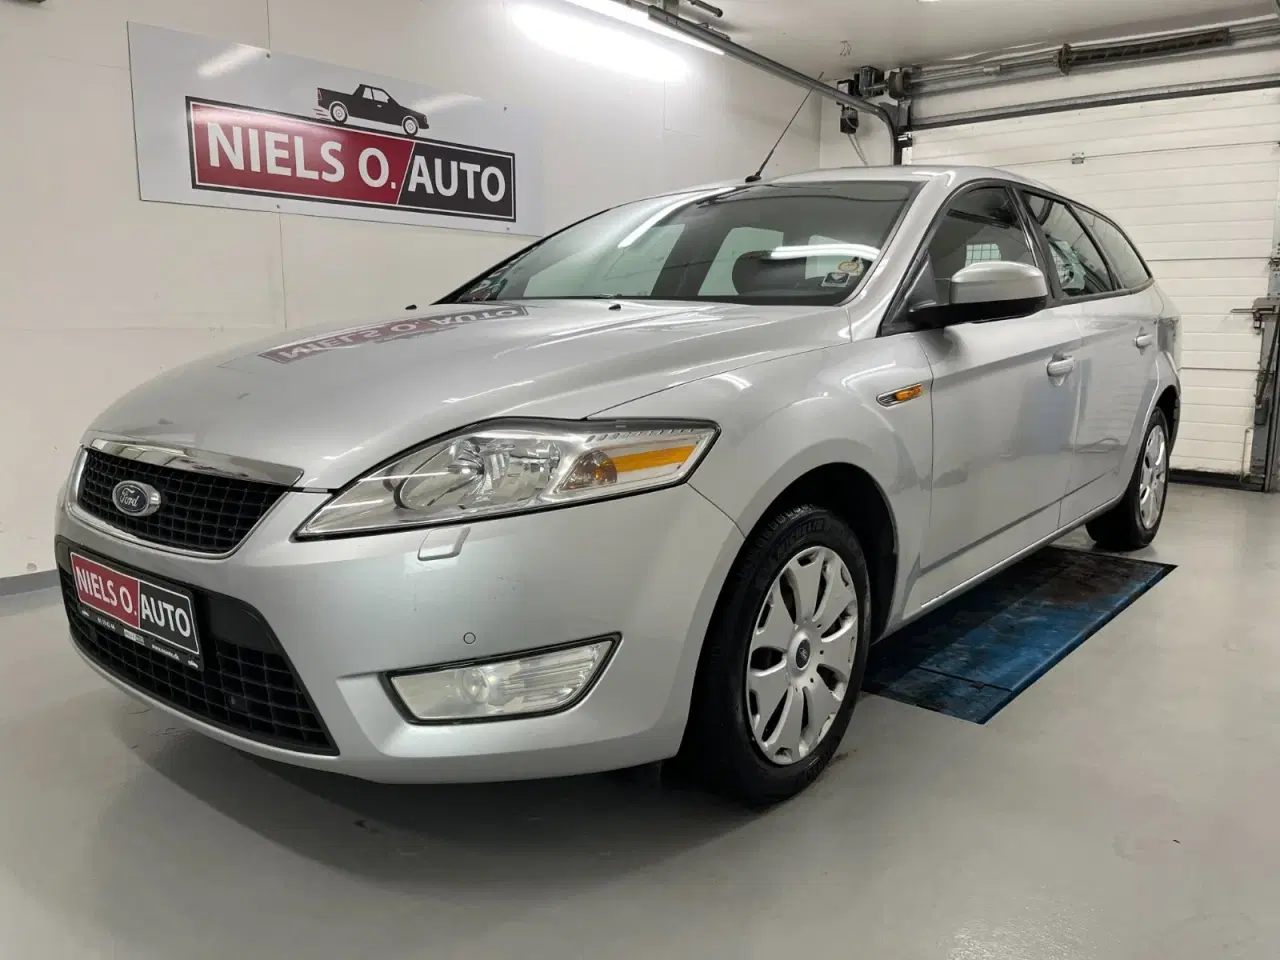 Billede 1 - Ford Mondeo 2,0 TDCi 140 Trend Collection stc.